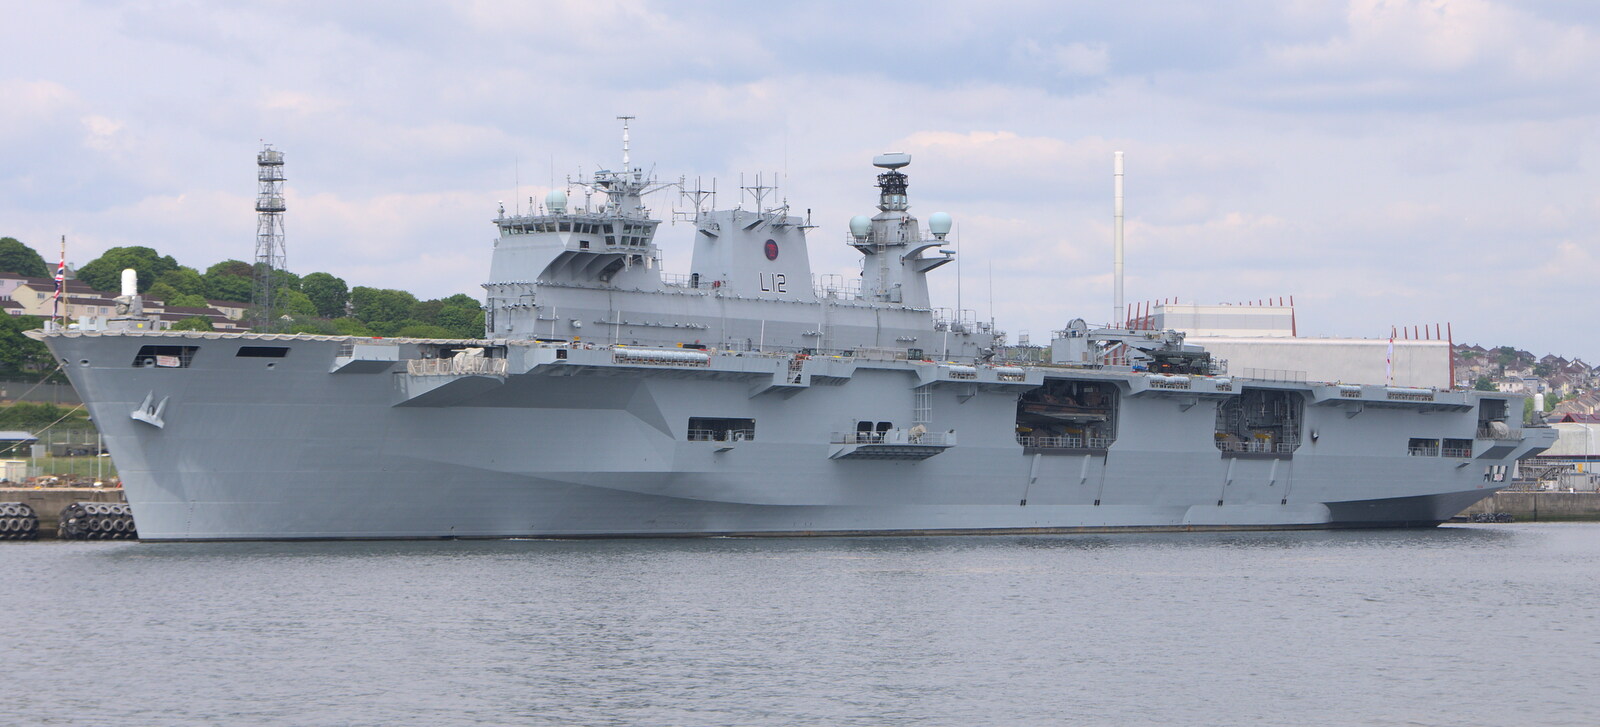 Another view of L12 HMS Ocean from A Tamar River Trip, Plymouth, Devon - 30th May 2016